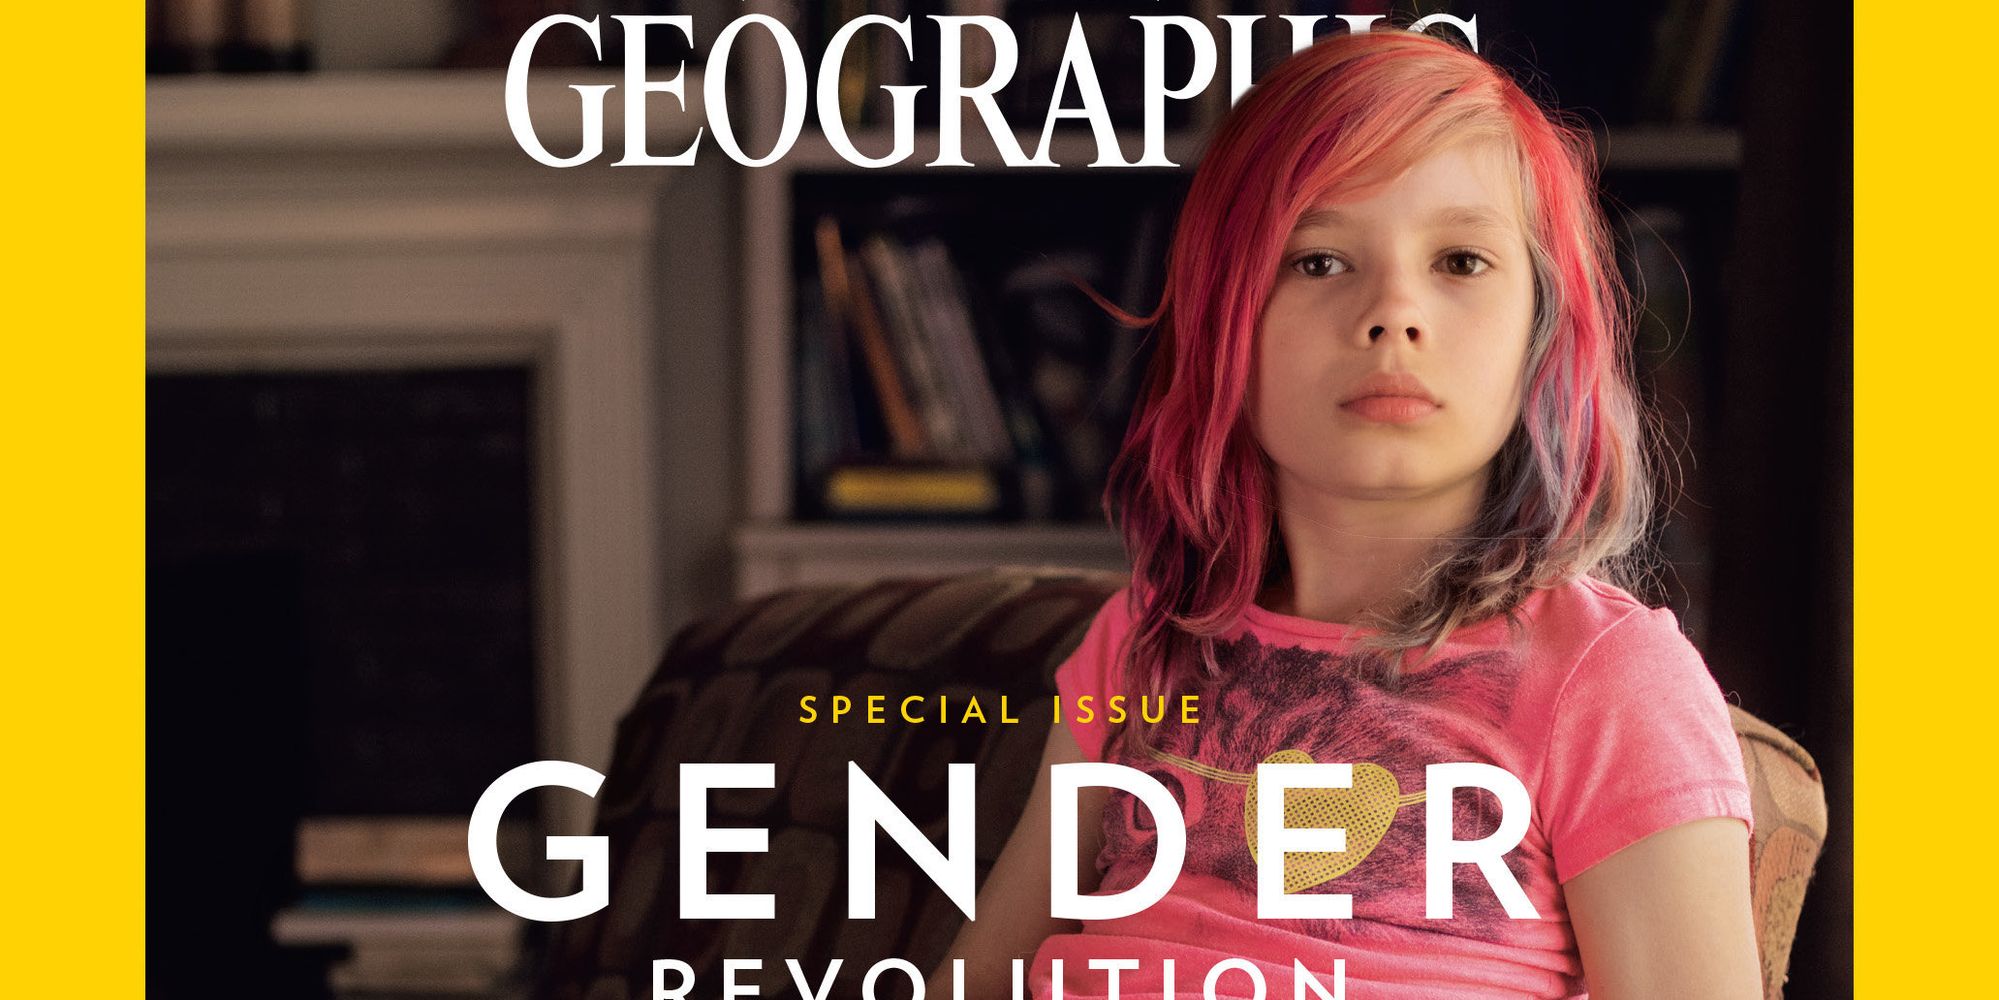 Nat Geo Just Developed A Groundbreaking Educational Resource About Gender